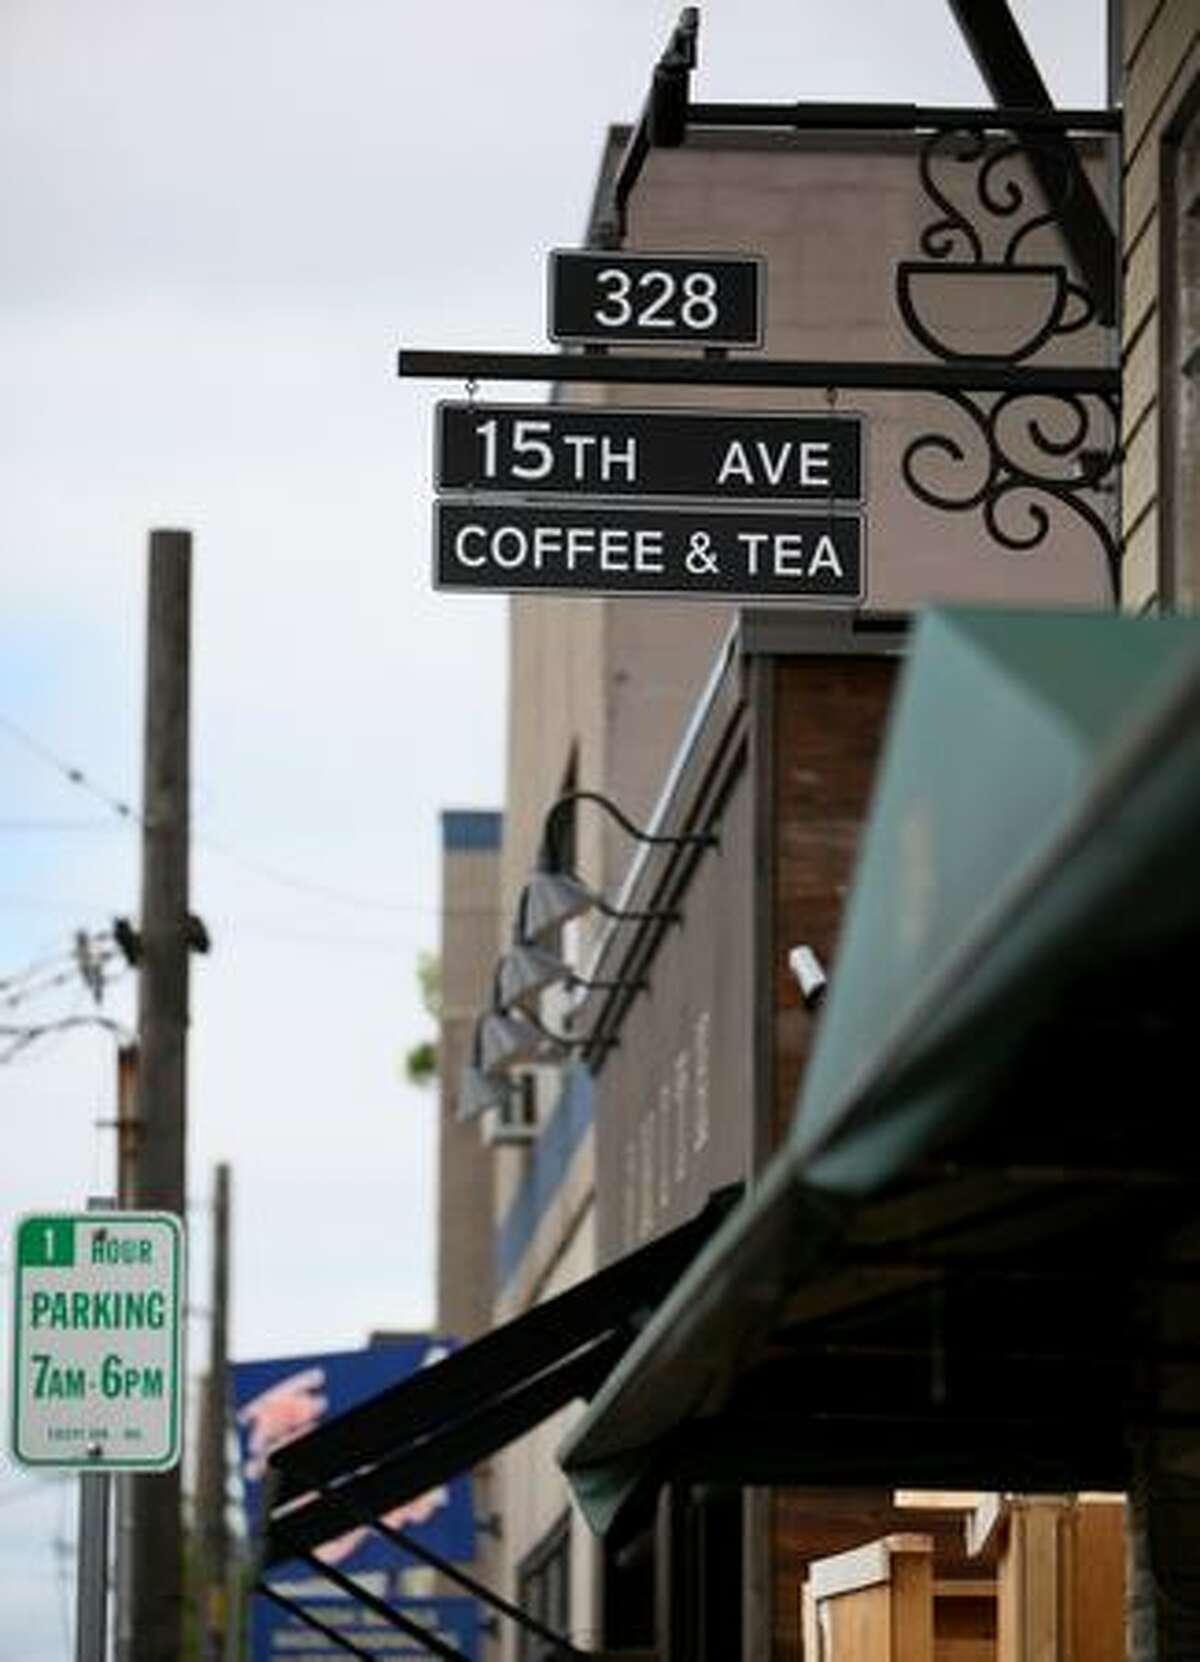 The sign of Starbucks' new 15th Avenue Coffee & Tea blends into the streetscape in Seattle's north Capitol Hill. The store is part of a project where Starbucks is trying to rebrand stores to blend into neighborhoods and be more of a community gathering place. The store opens for business on Friday, July 24.